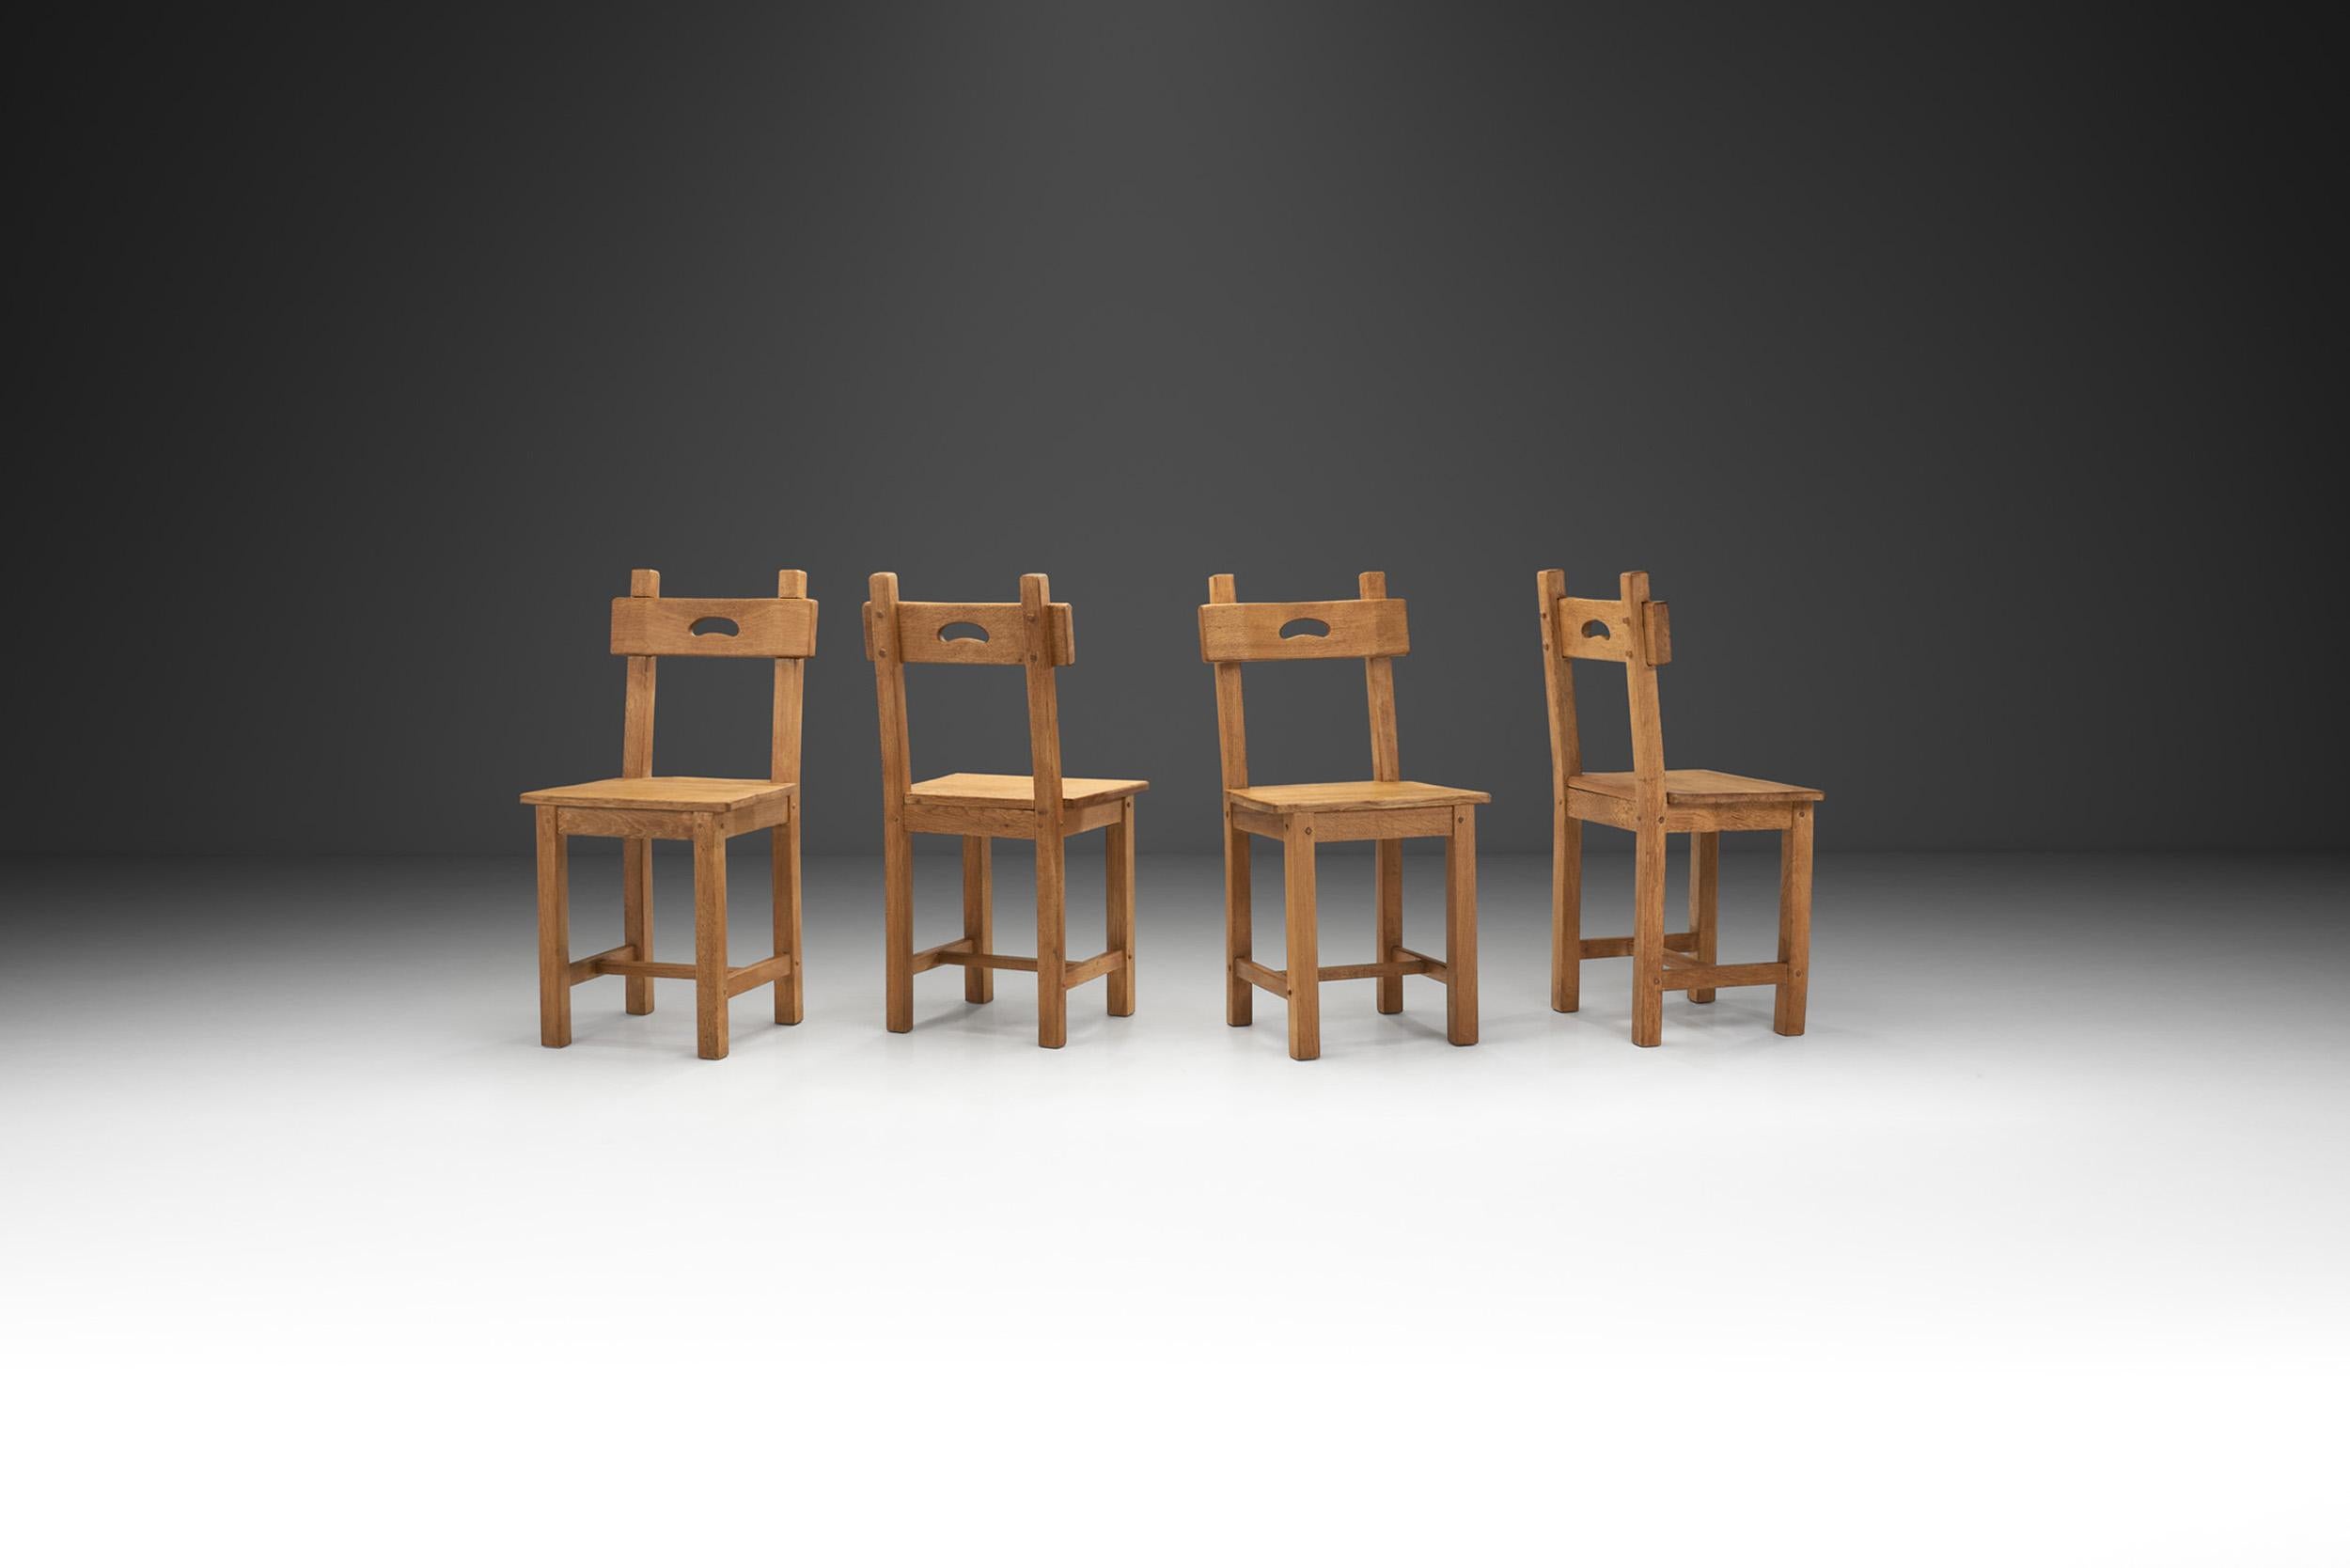 Wood, in many ways, is more valuable than other materials used in furniture manufacturing because its natural grain guarantees that each piece is unique. This is especially important in the case of this set of four, as each chair is unique and